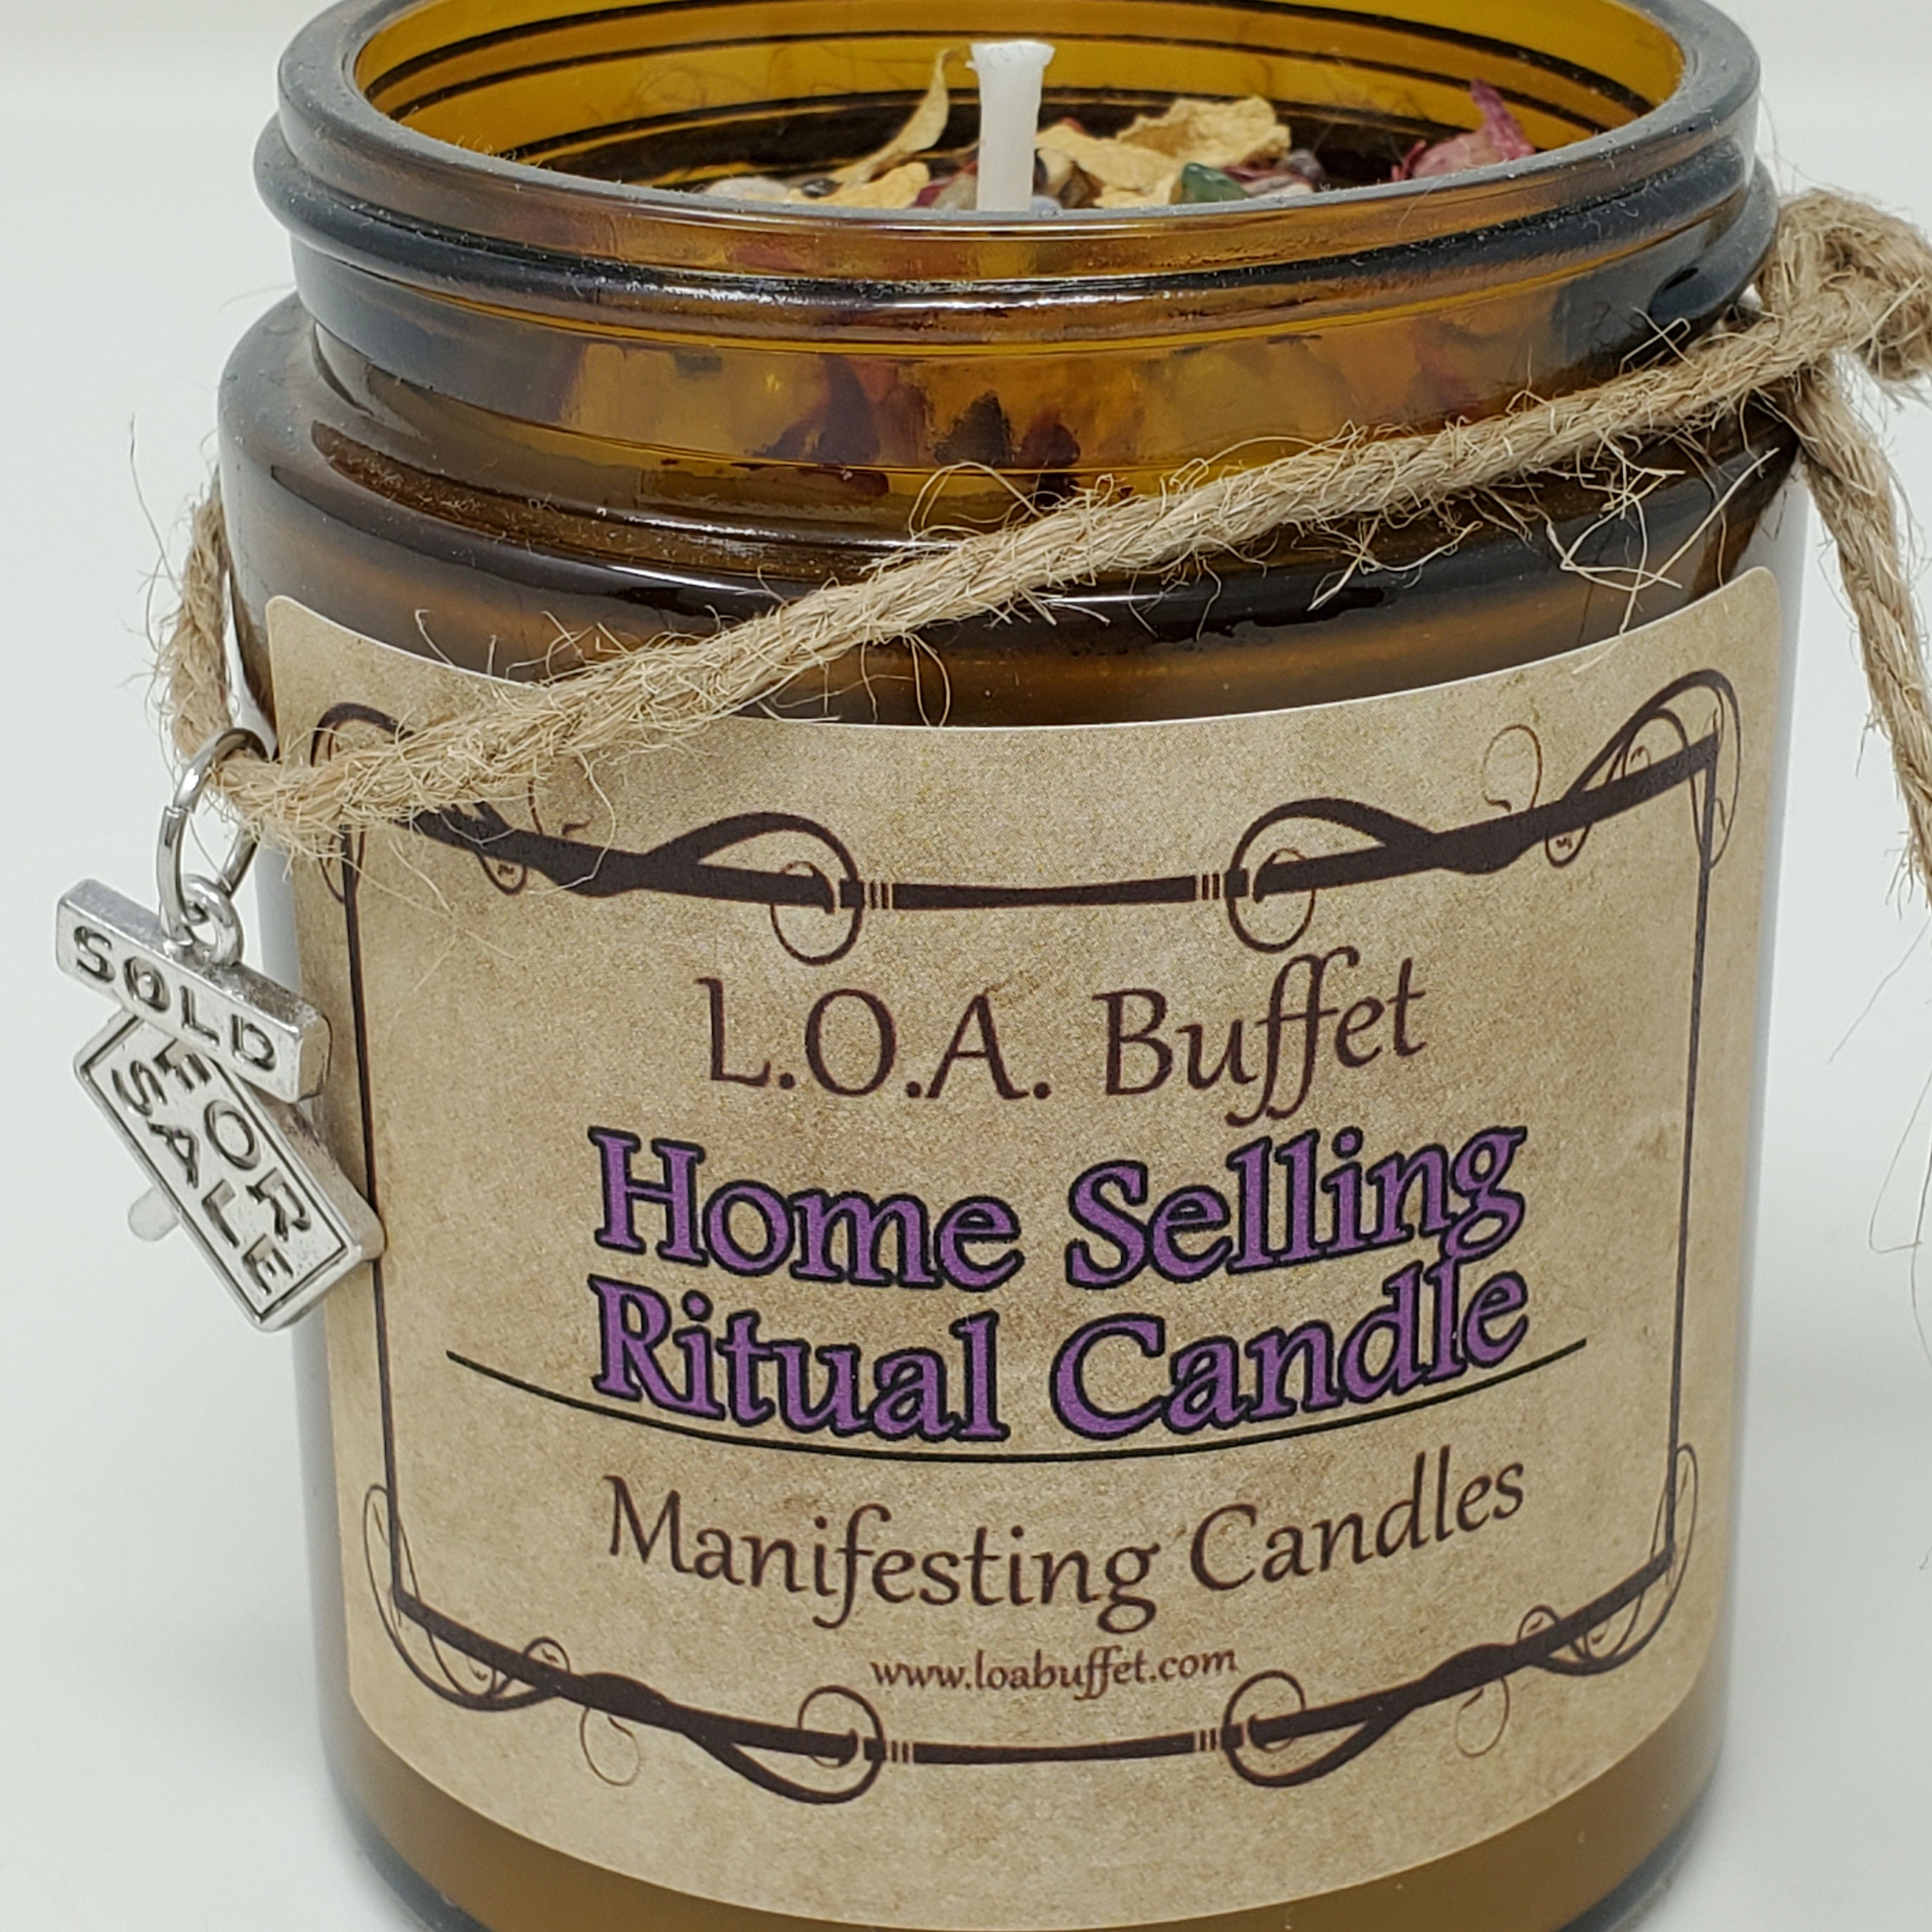 Home Selling Ritual Candle, Law of Attraction, Hand Poured Soy Candle,  Manifesting Candle, for Sale by Owner, Realtor Candle 